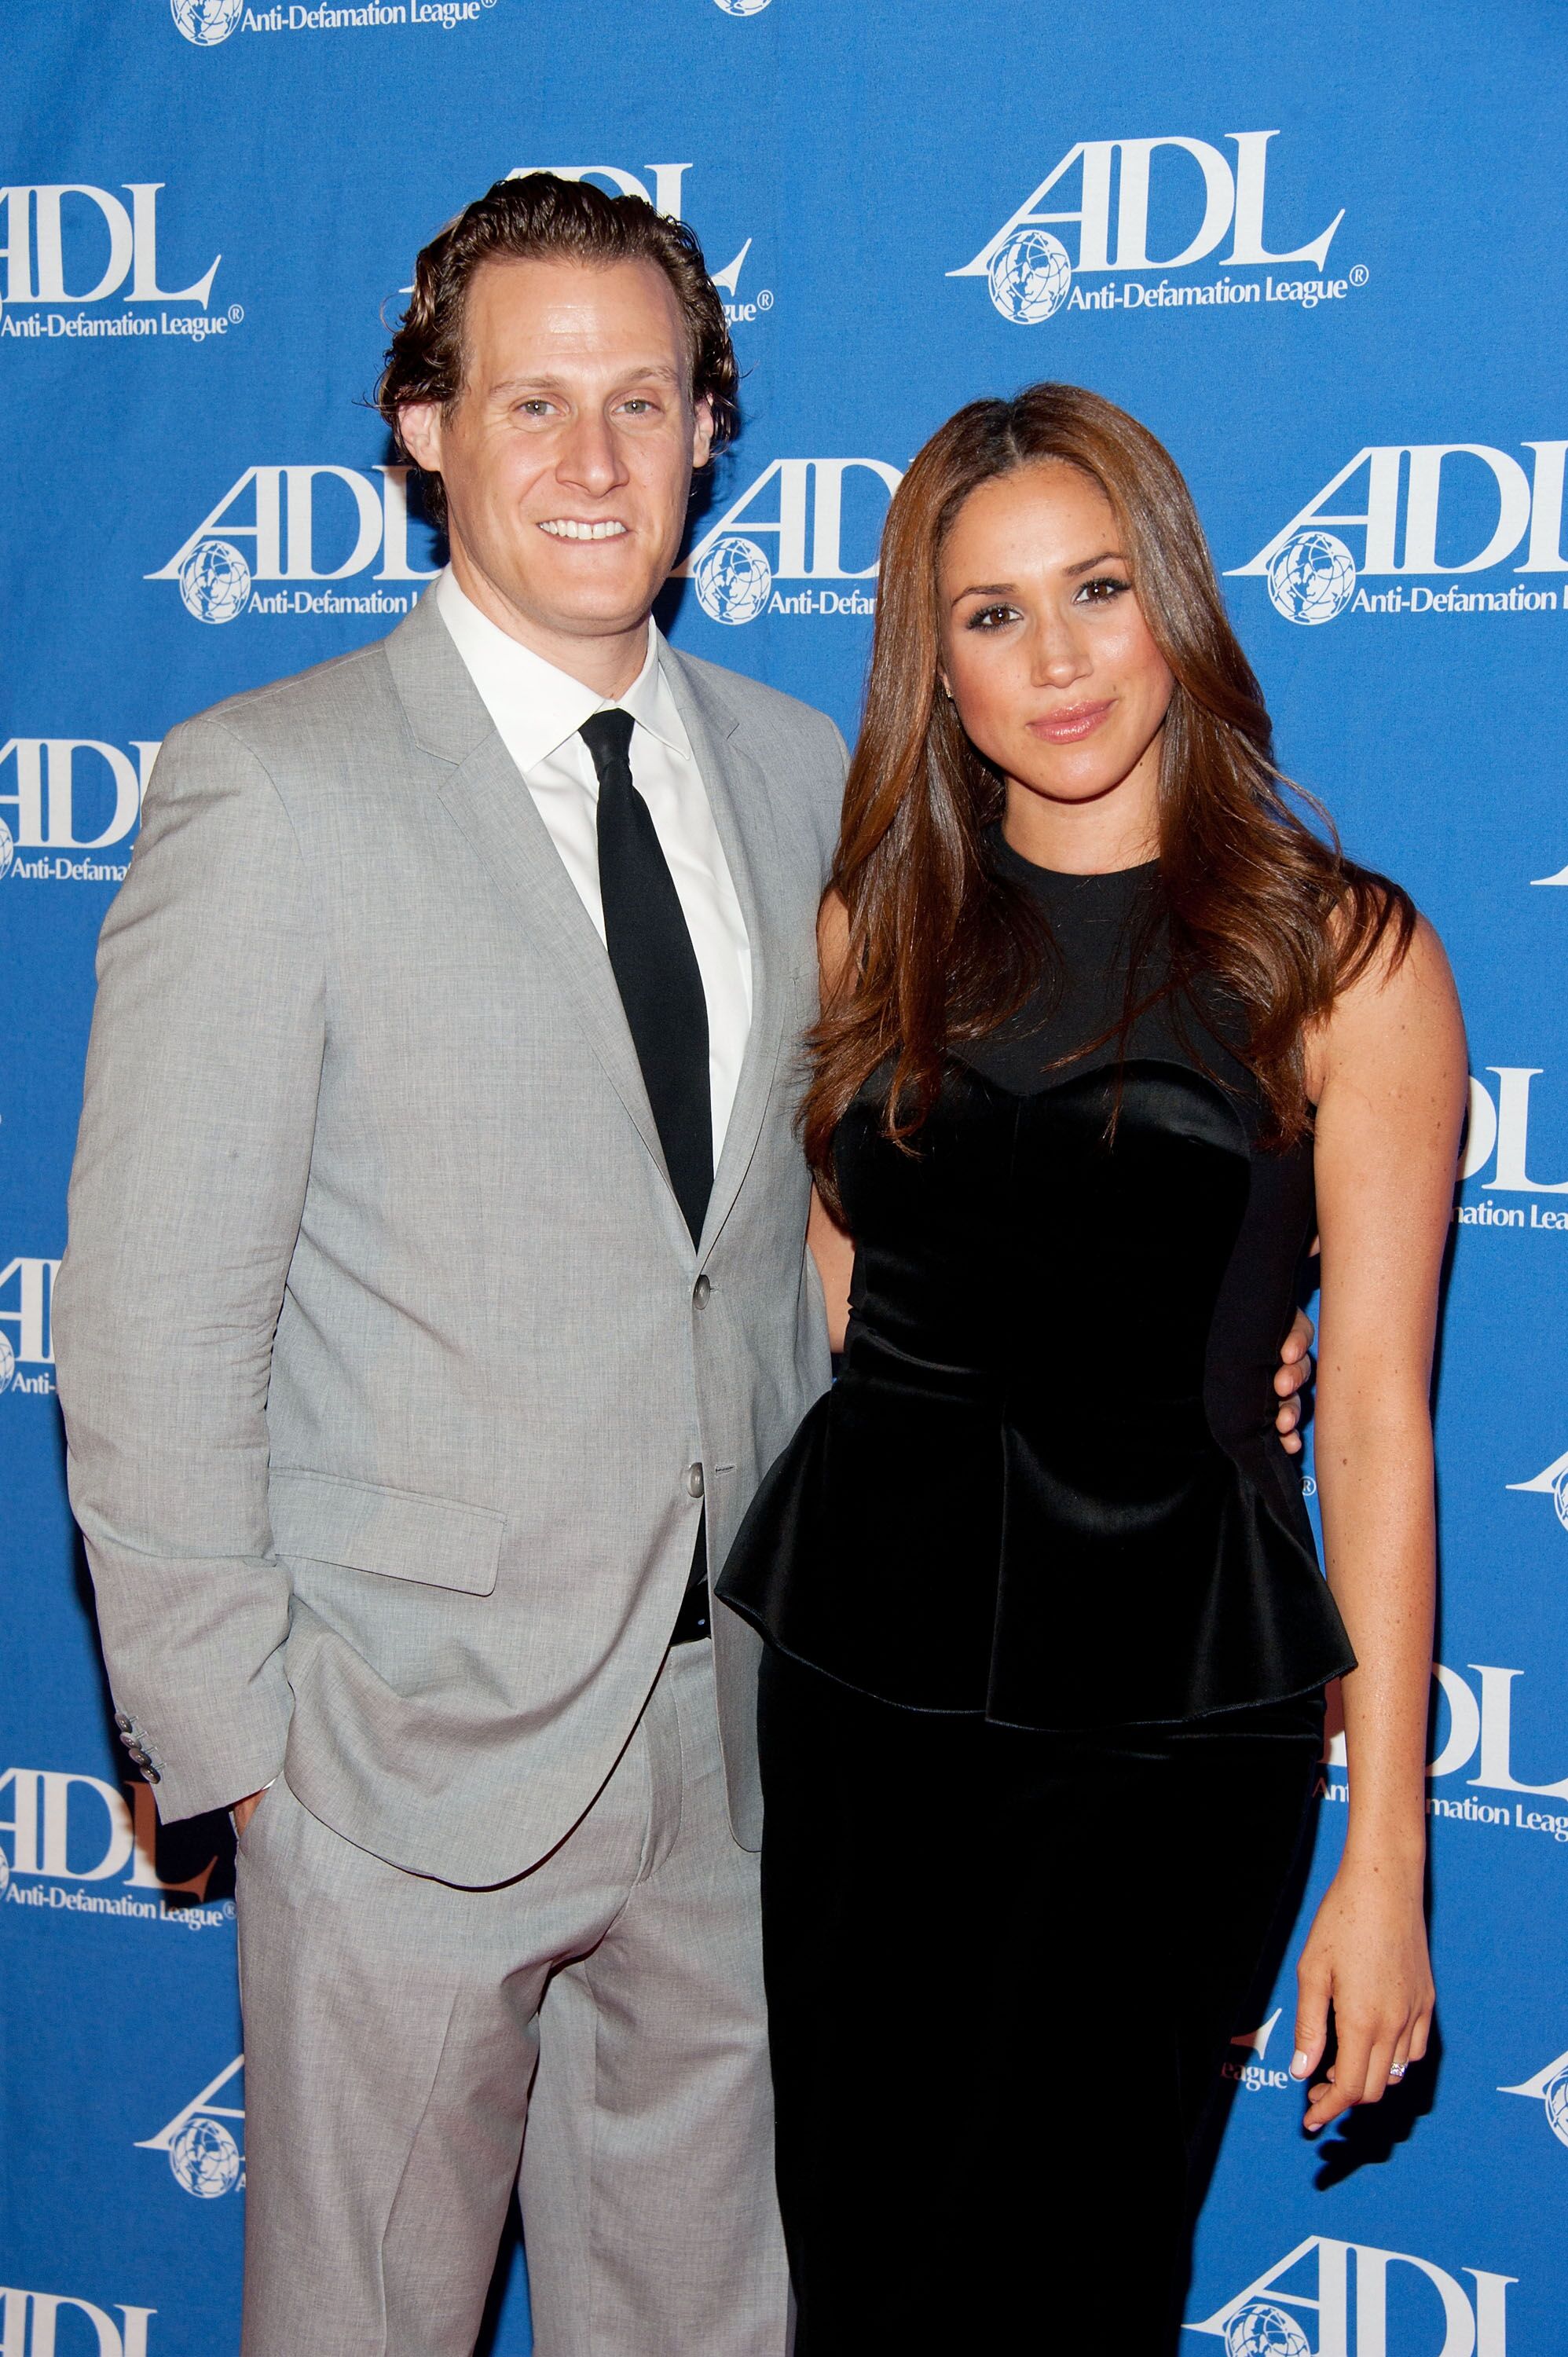 Trevor Engelson and Meghan Markle at a Anti-Defamation League Event | Source: Getty Images